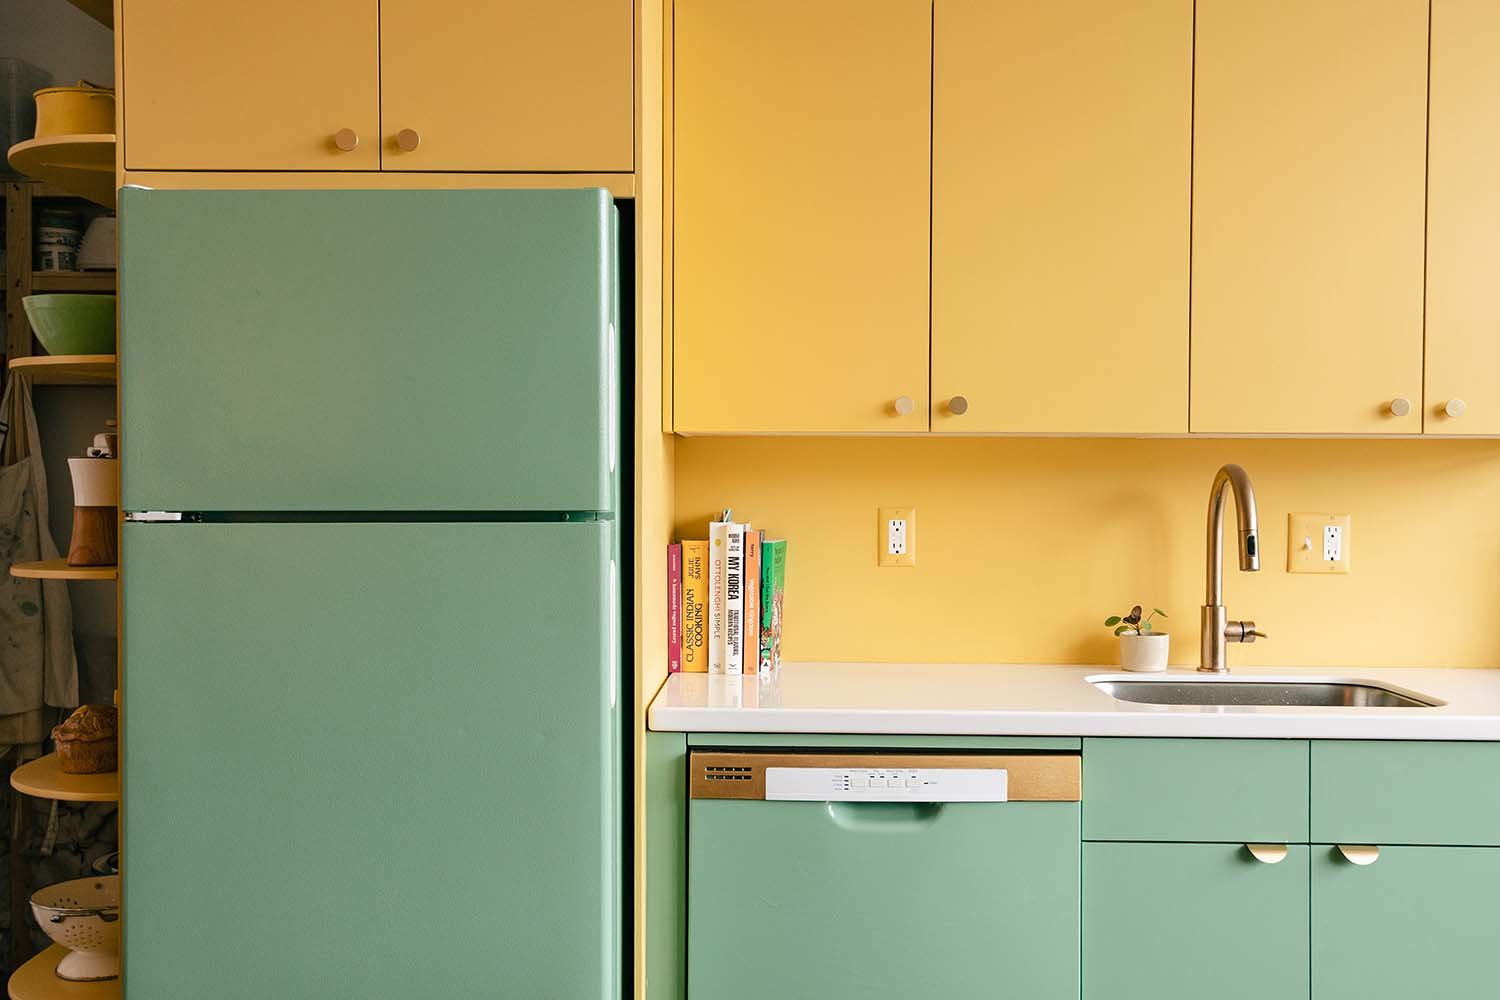 What to Know About Painting Kitchen Appliances This Old House